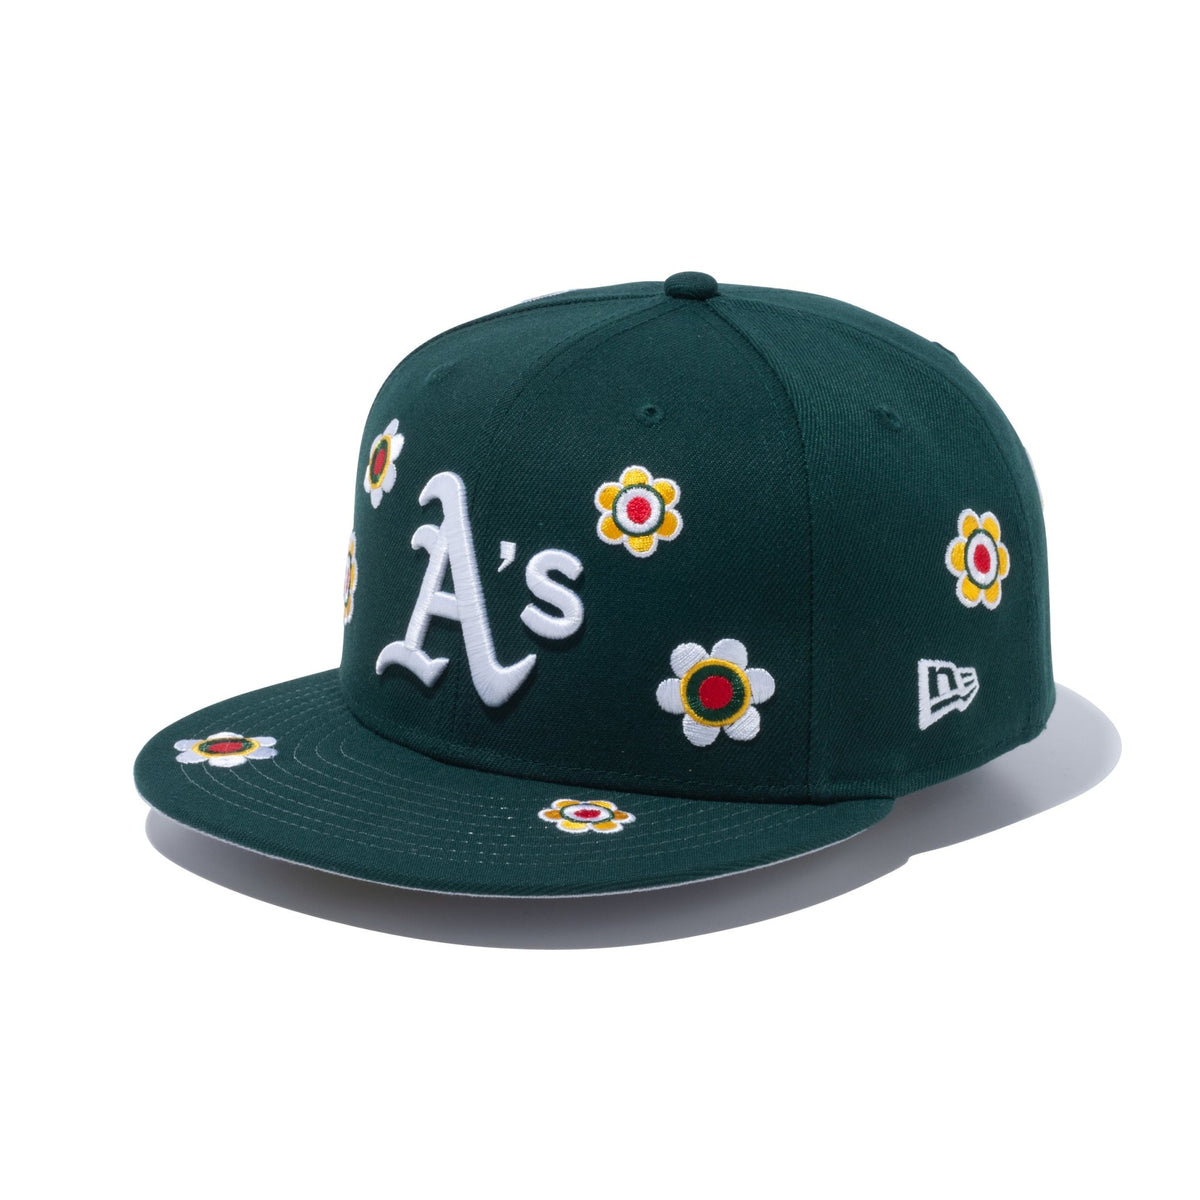 59FIFTY MLB Flower Embroidery Oakland Athletics